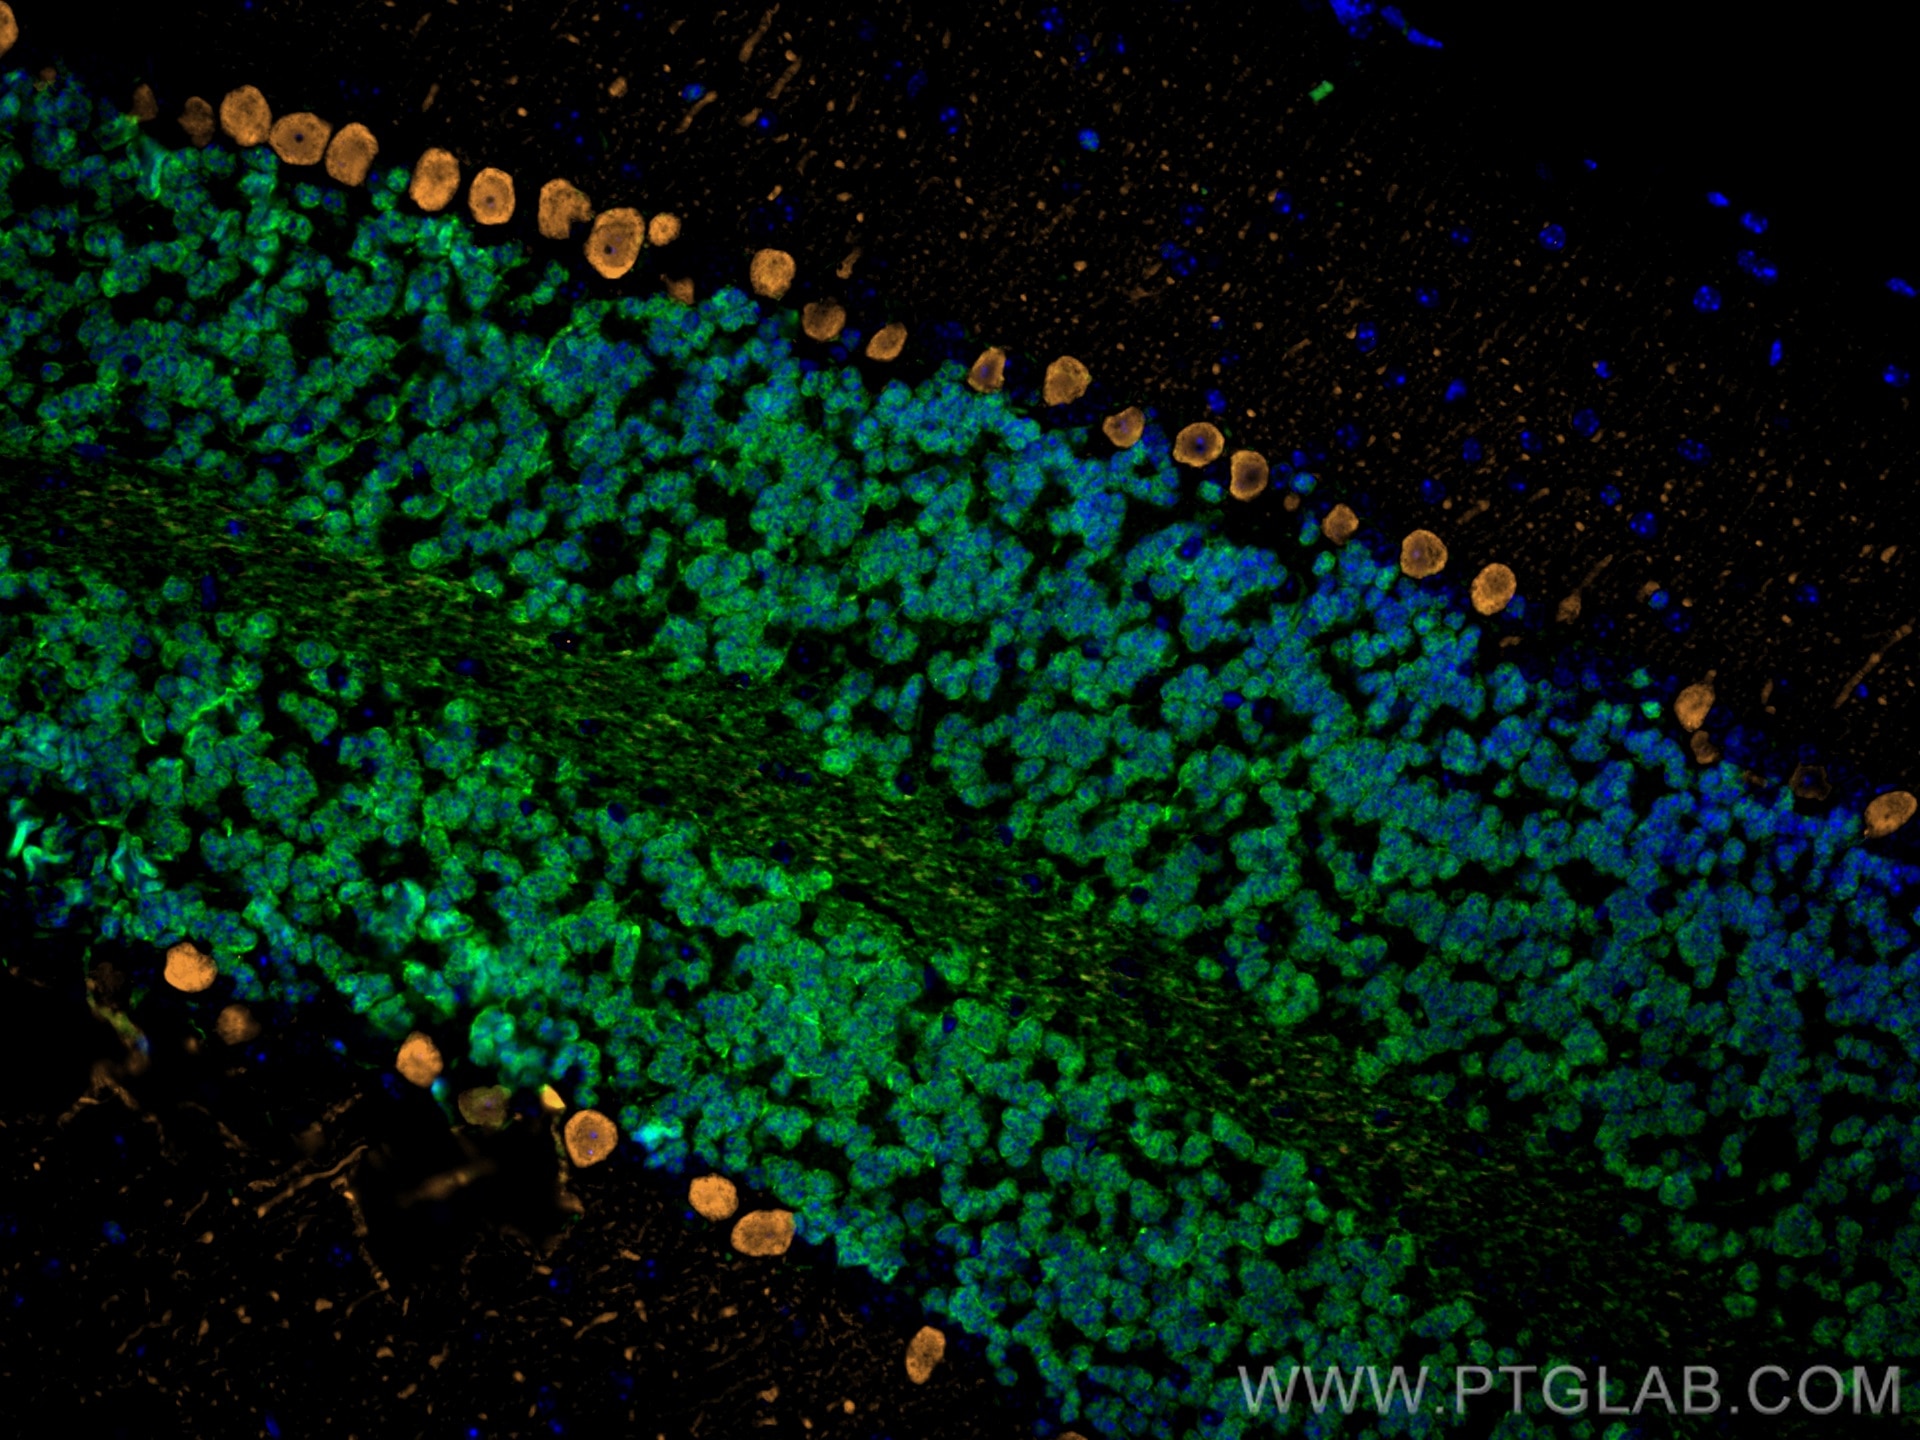 Immunofluorescence (IF) analysis of mouse cerebellum FFPE tissue stained with rabbit anti-NeuN polyclonal antibody (26975-1-AP, green) and mouse anti-Calbindin-D28k monoclonal antibody (66394-1-Ig, orange). Multi-rAb CoraLite® Plus 488-Goat Anti-Rabbit Recombinant Secondary Antibody (H+L) (RGAM002, 1:500) and Multi-rAb CoraLite® Plus 555-Goat Anti-Mouse Recombinant Secondary Antibody (H+L) (RGAM003, 1:500) were used for detection.  